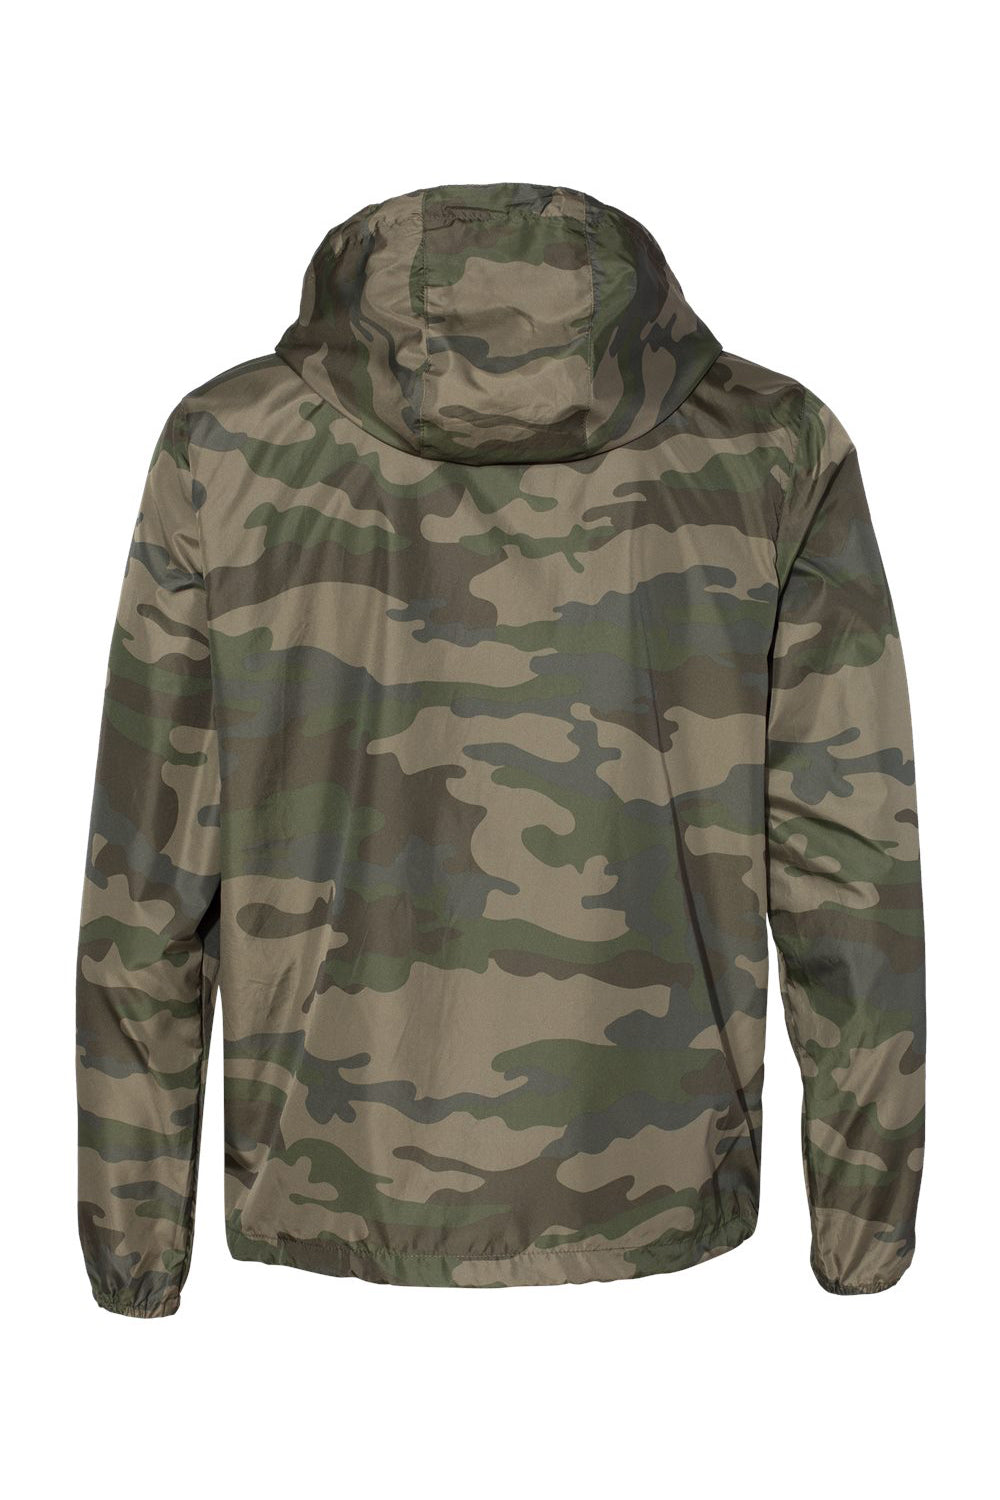 Independent Trading Co. EXP54LWZ Mens Full Zip Windbreaker Hooded Jacket Forest Green Camo Flat Back